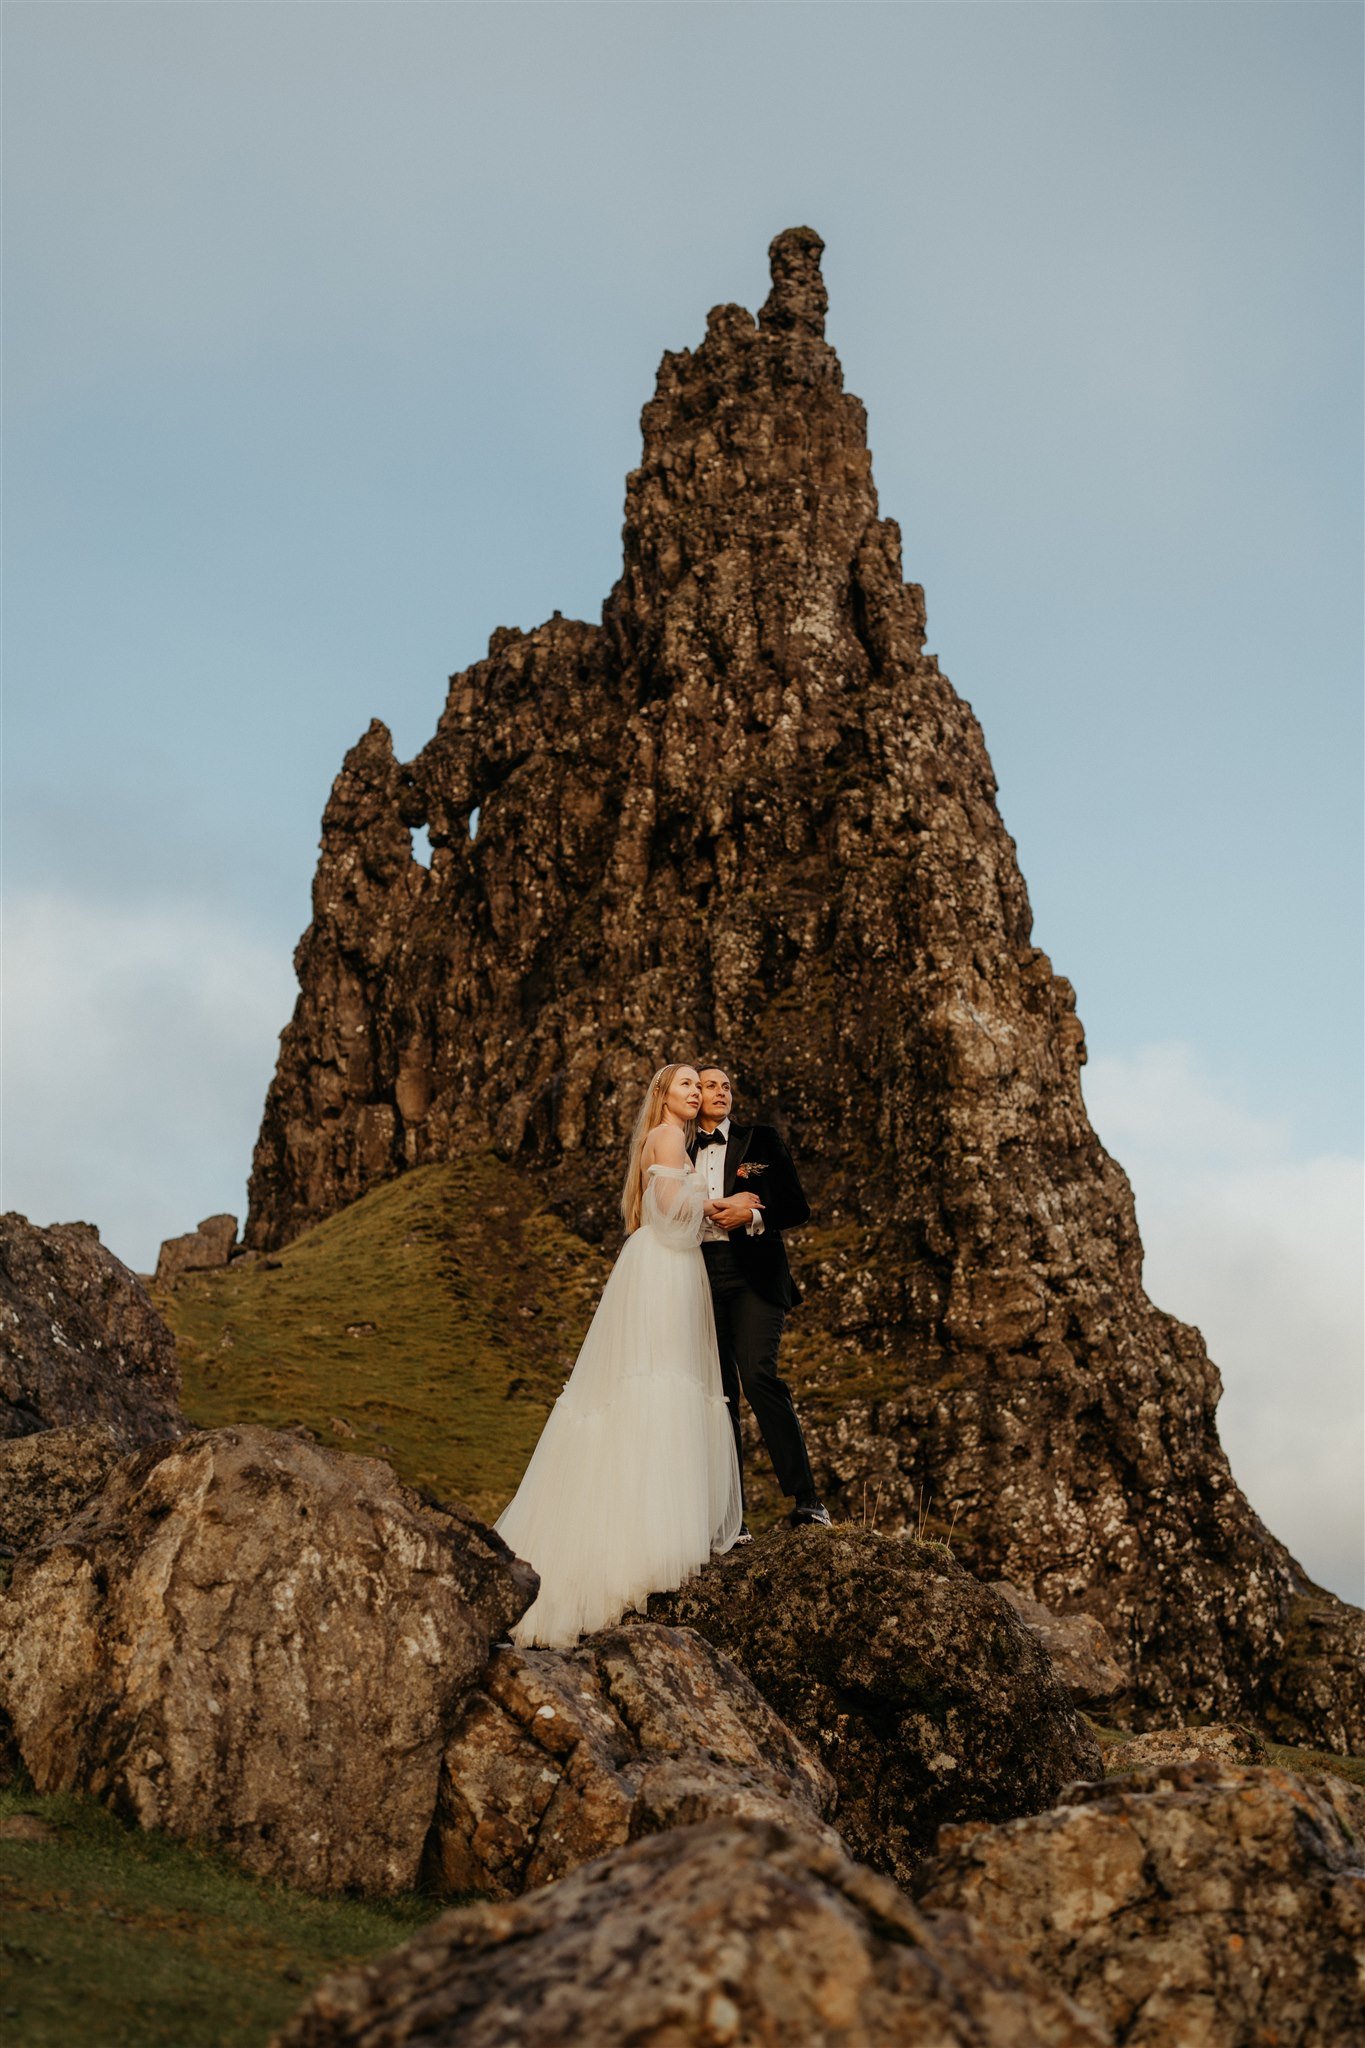 Brides hold each other during adventure elopement photos on the Isle of Skye